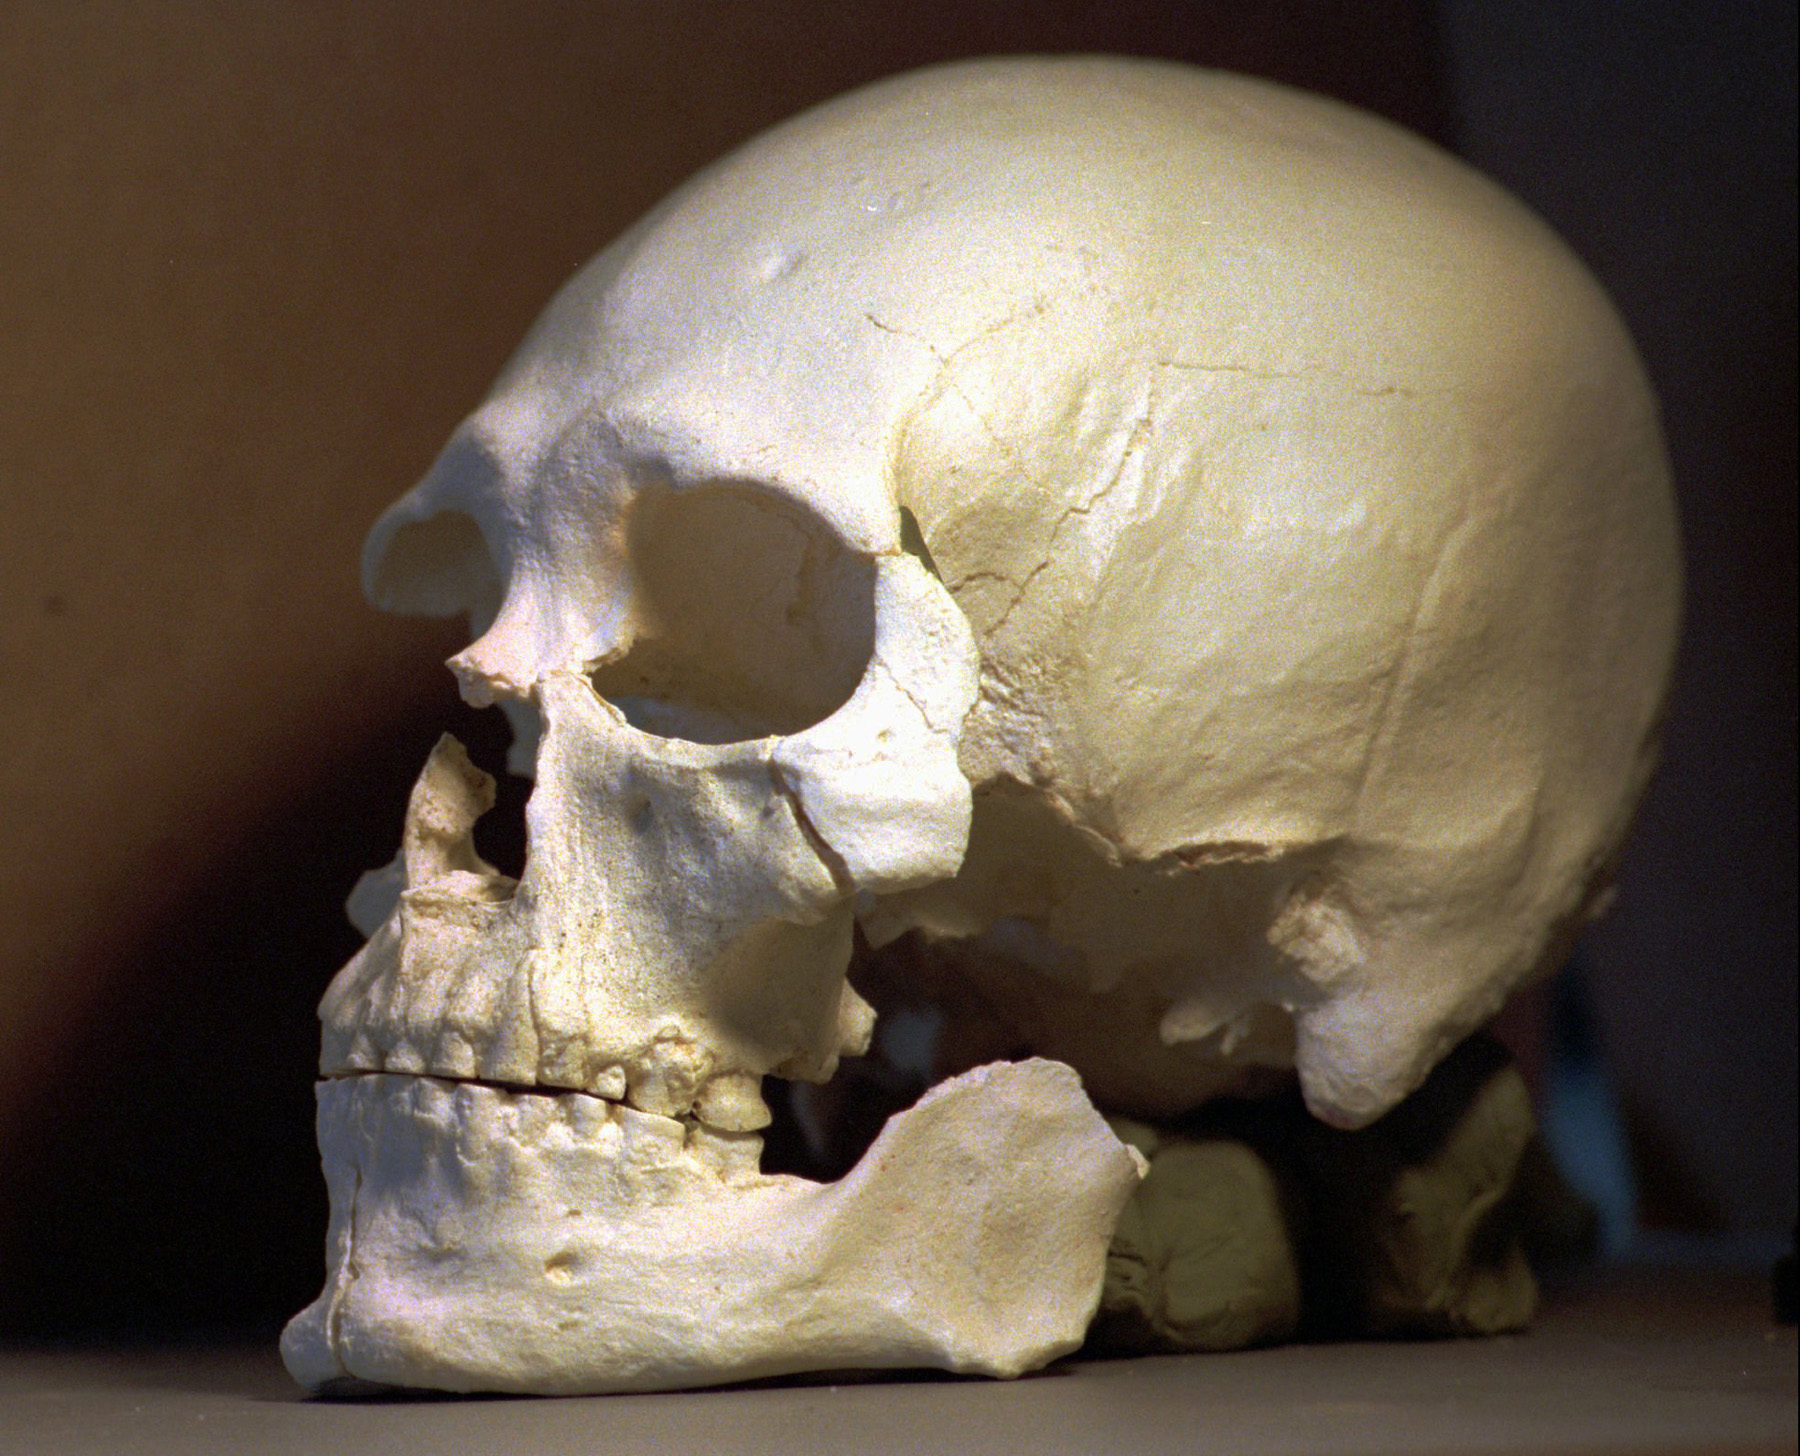 A plastic casting of the skull from the bones known as Kennewick Man, is seen in Richland, Washington, July 24, 1997.